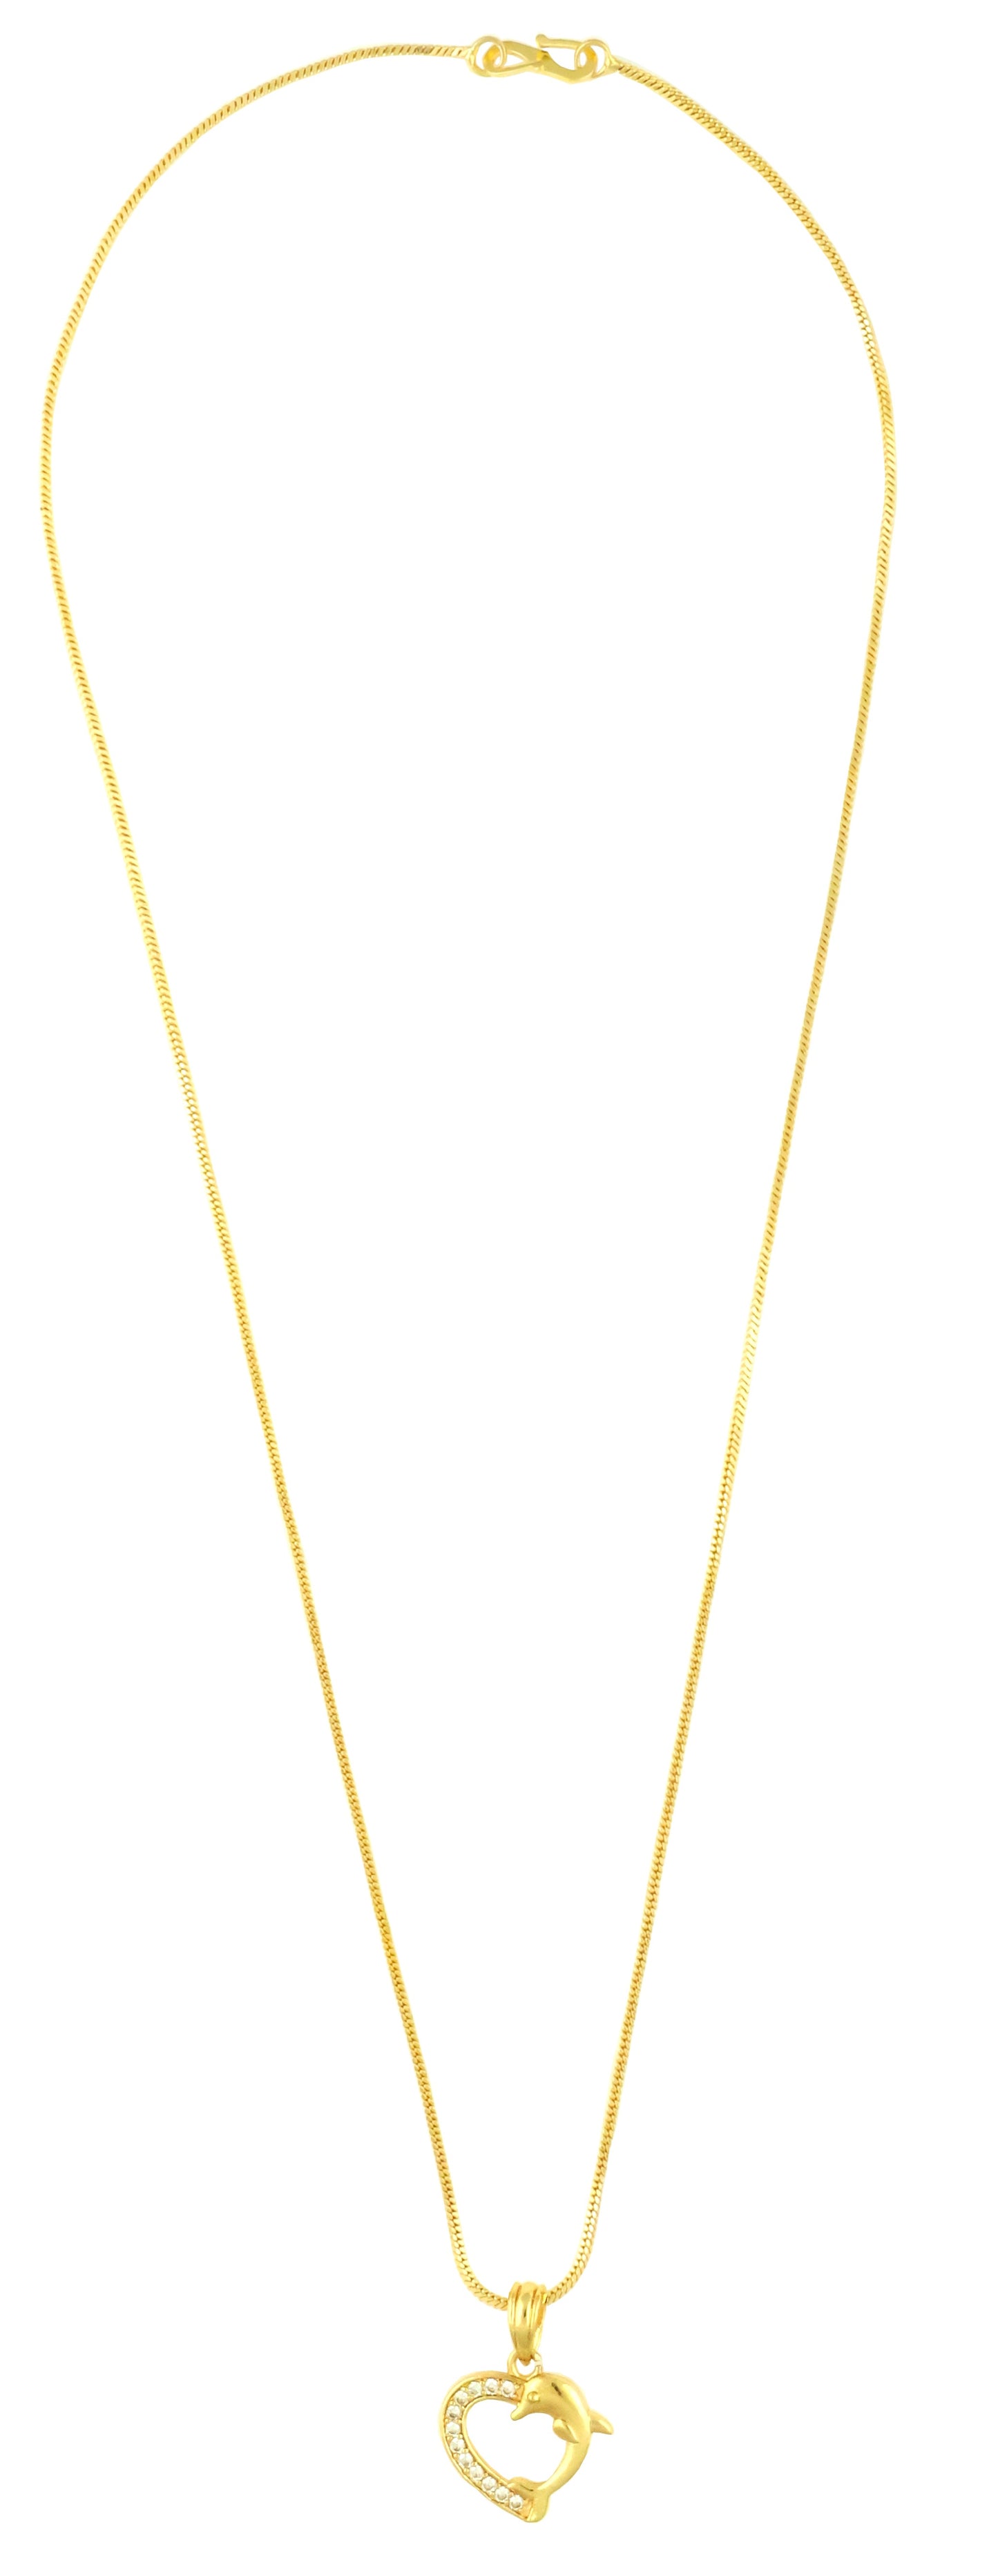 Mekkna Gold Plated Combo of Pendant Collection - Shop Now!